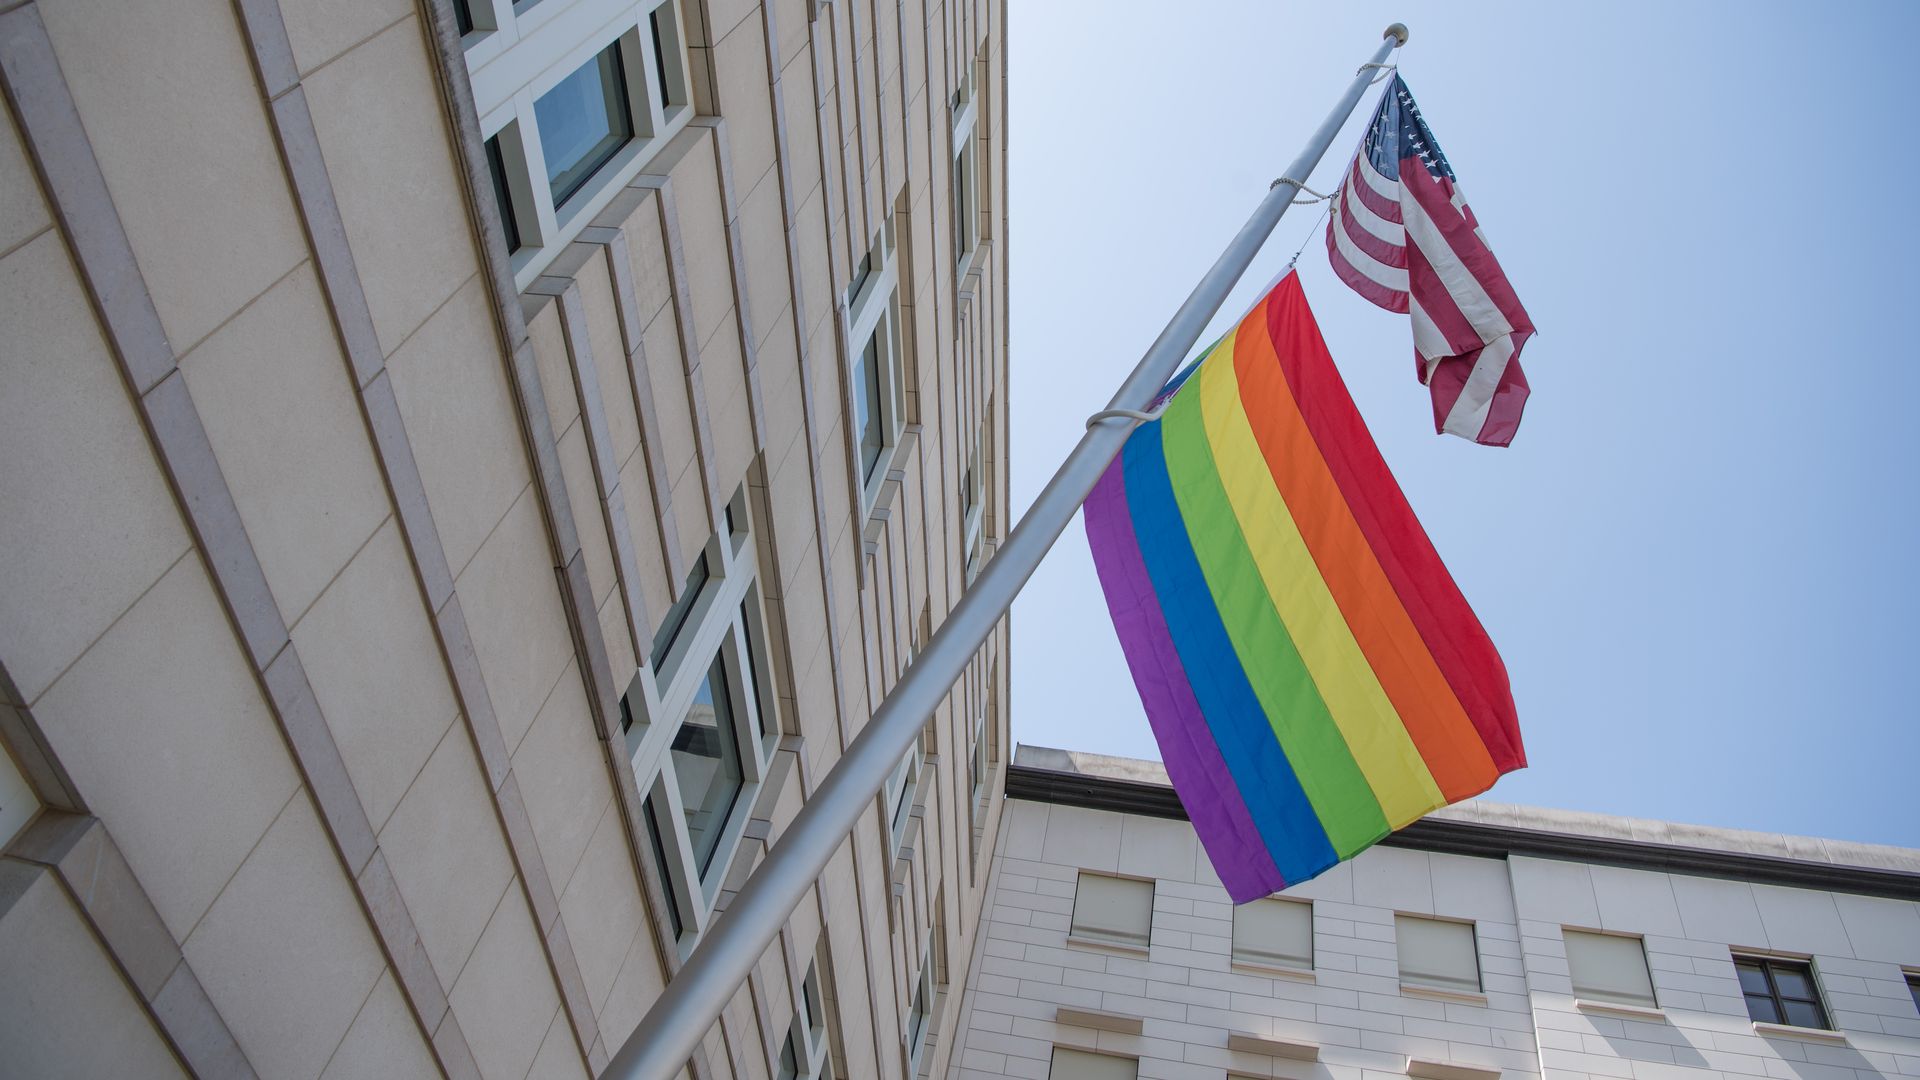  A rainbow flag hangs under a US flag at the US embassy in Berlin, Germany.